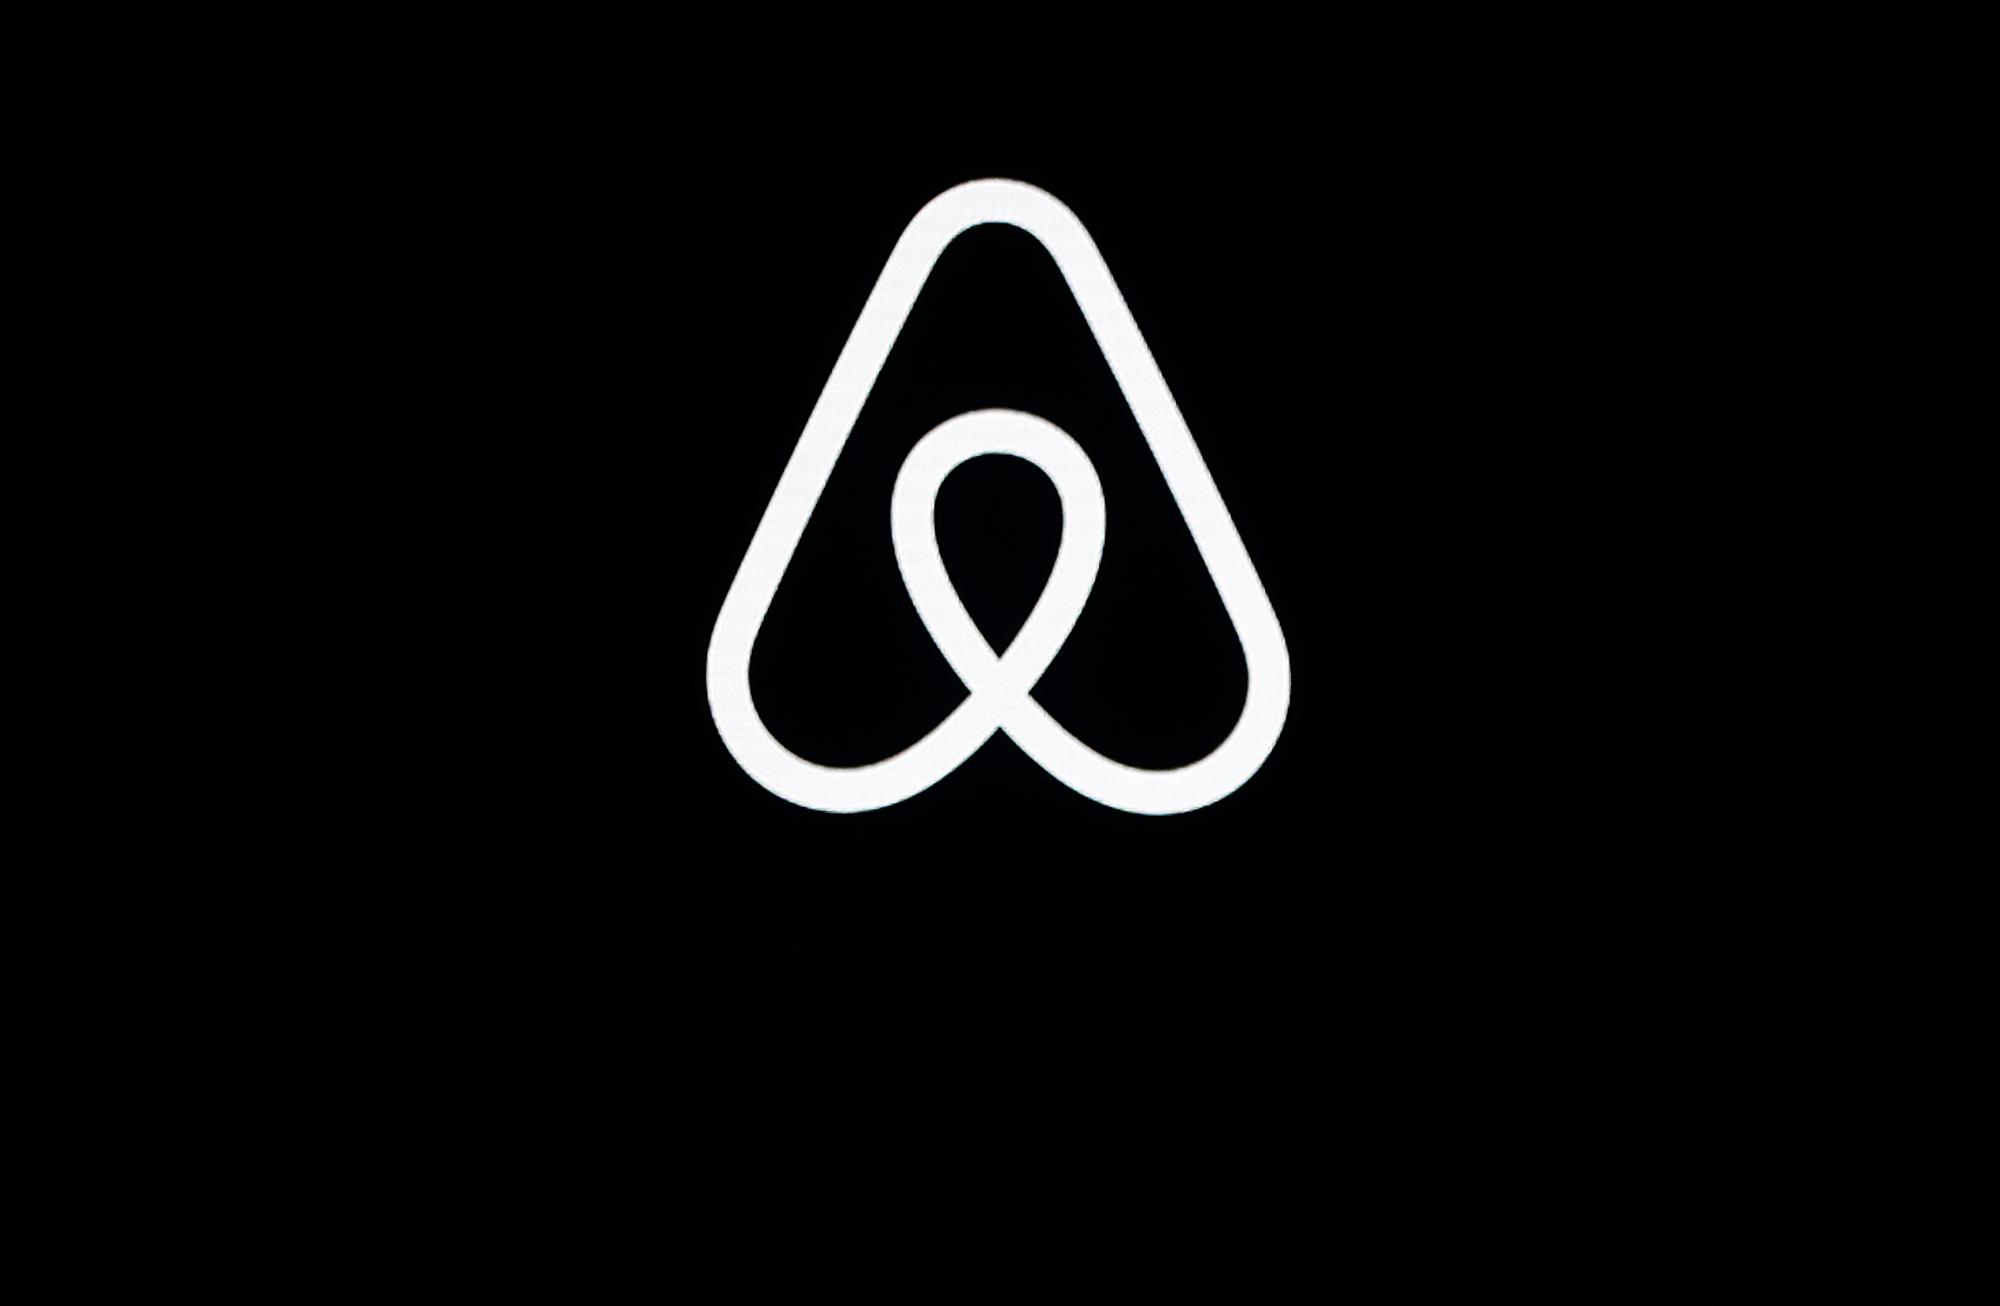 Black and white Airbnb logo